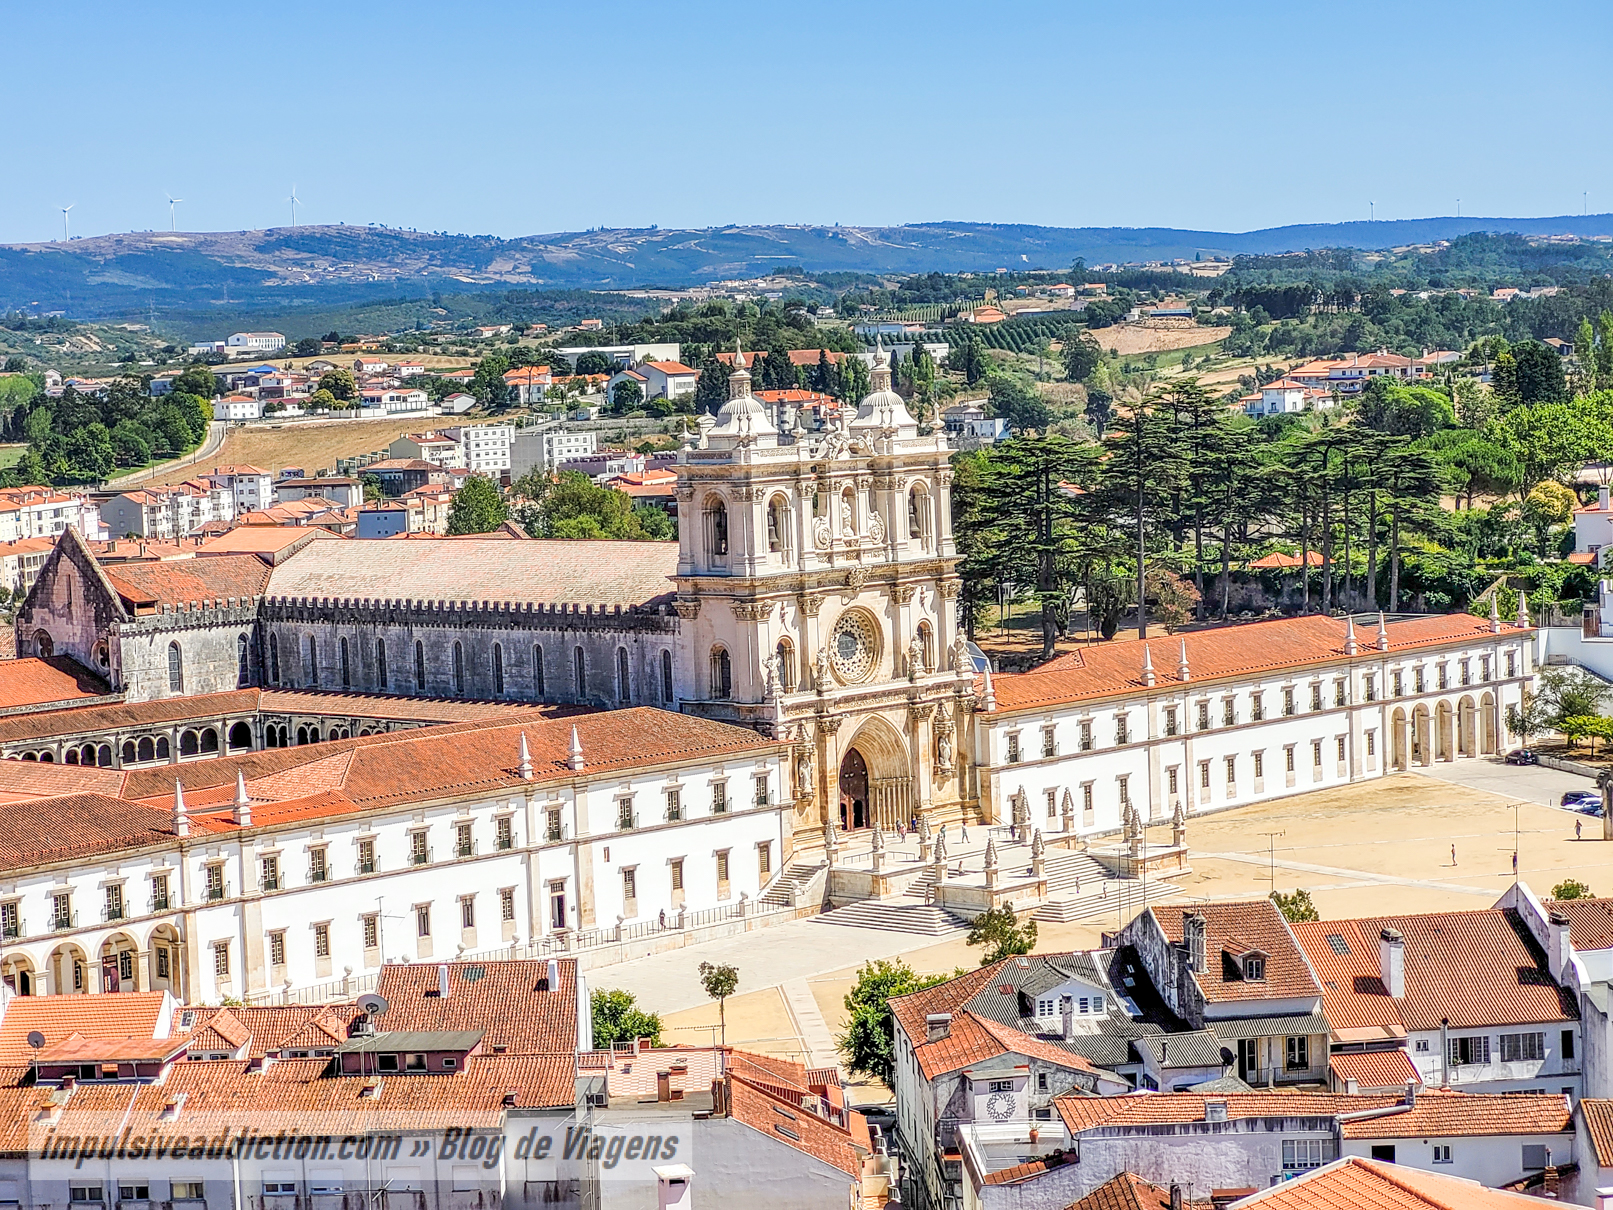 Viewpoint of the Alcobaça Monastery from the castle